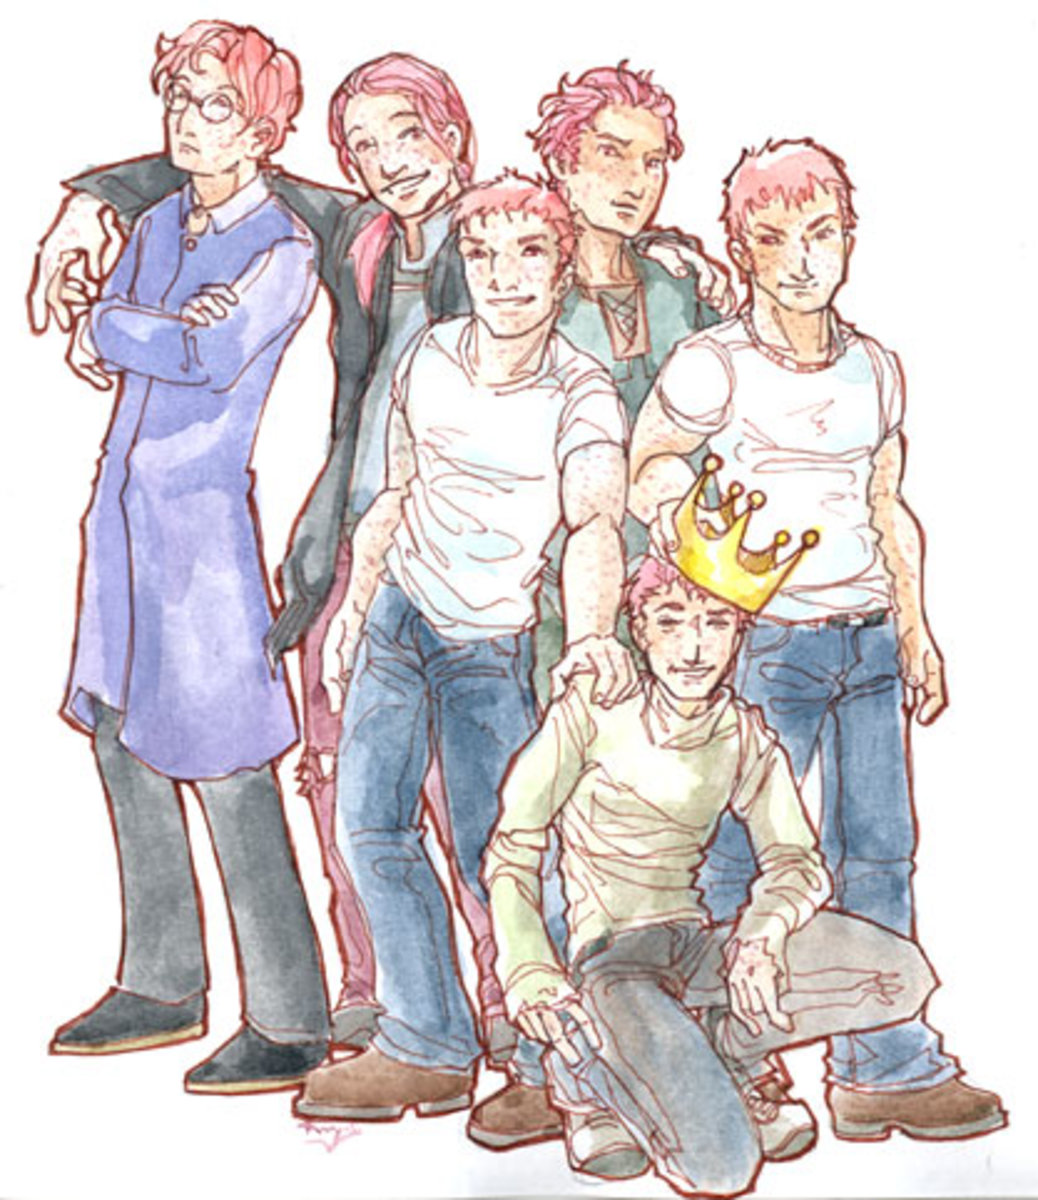 Percy, Bill, Fred, Charlie, Ron, George - this is a great piece of art that captures the essence of the Weasley brothers. You can see the disdain Percy has and the love they all have for each other.